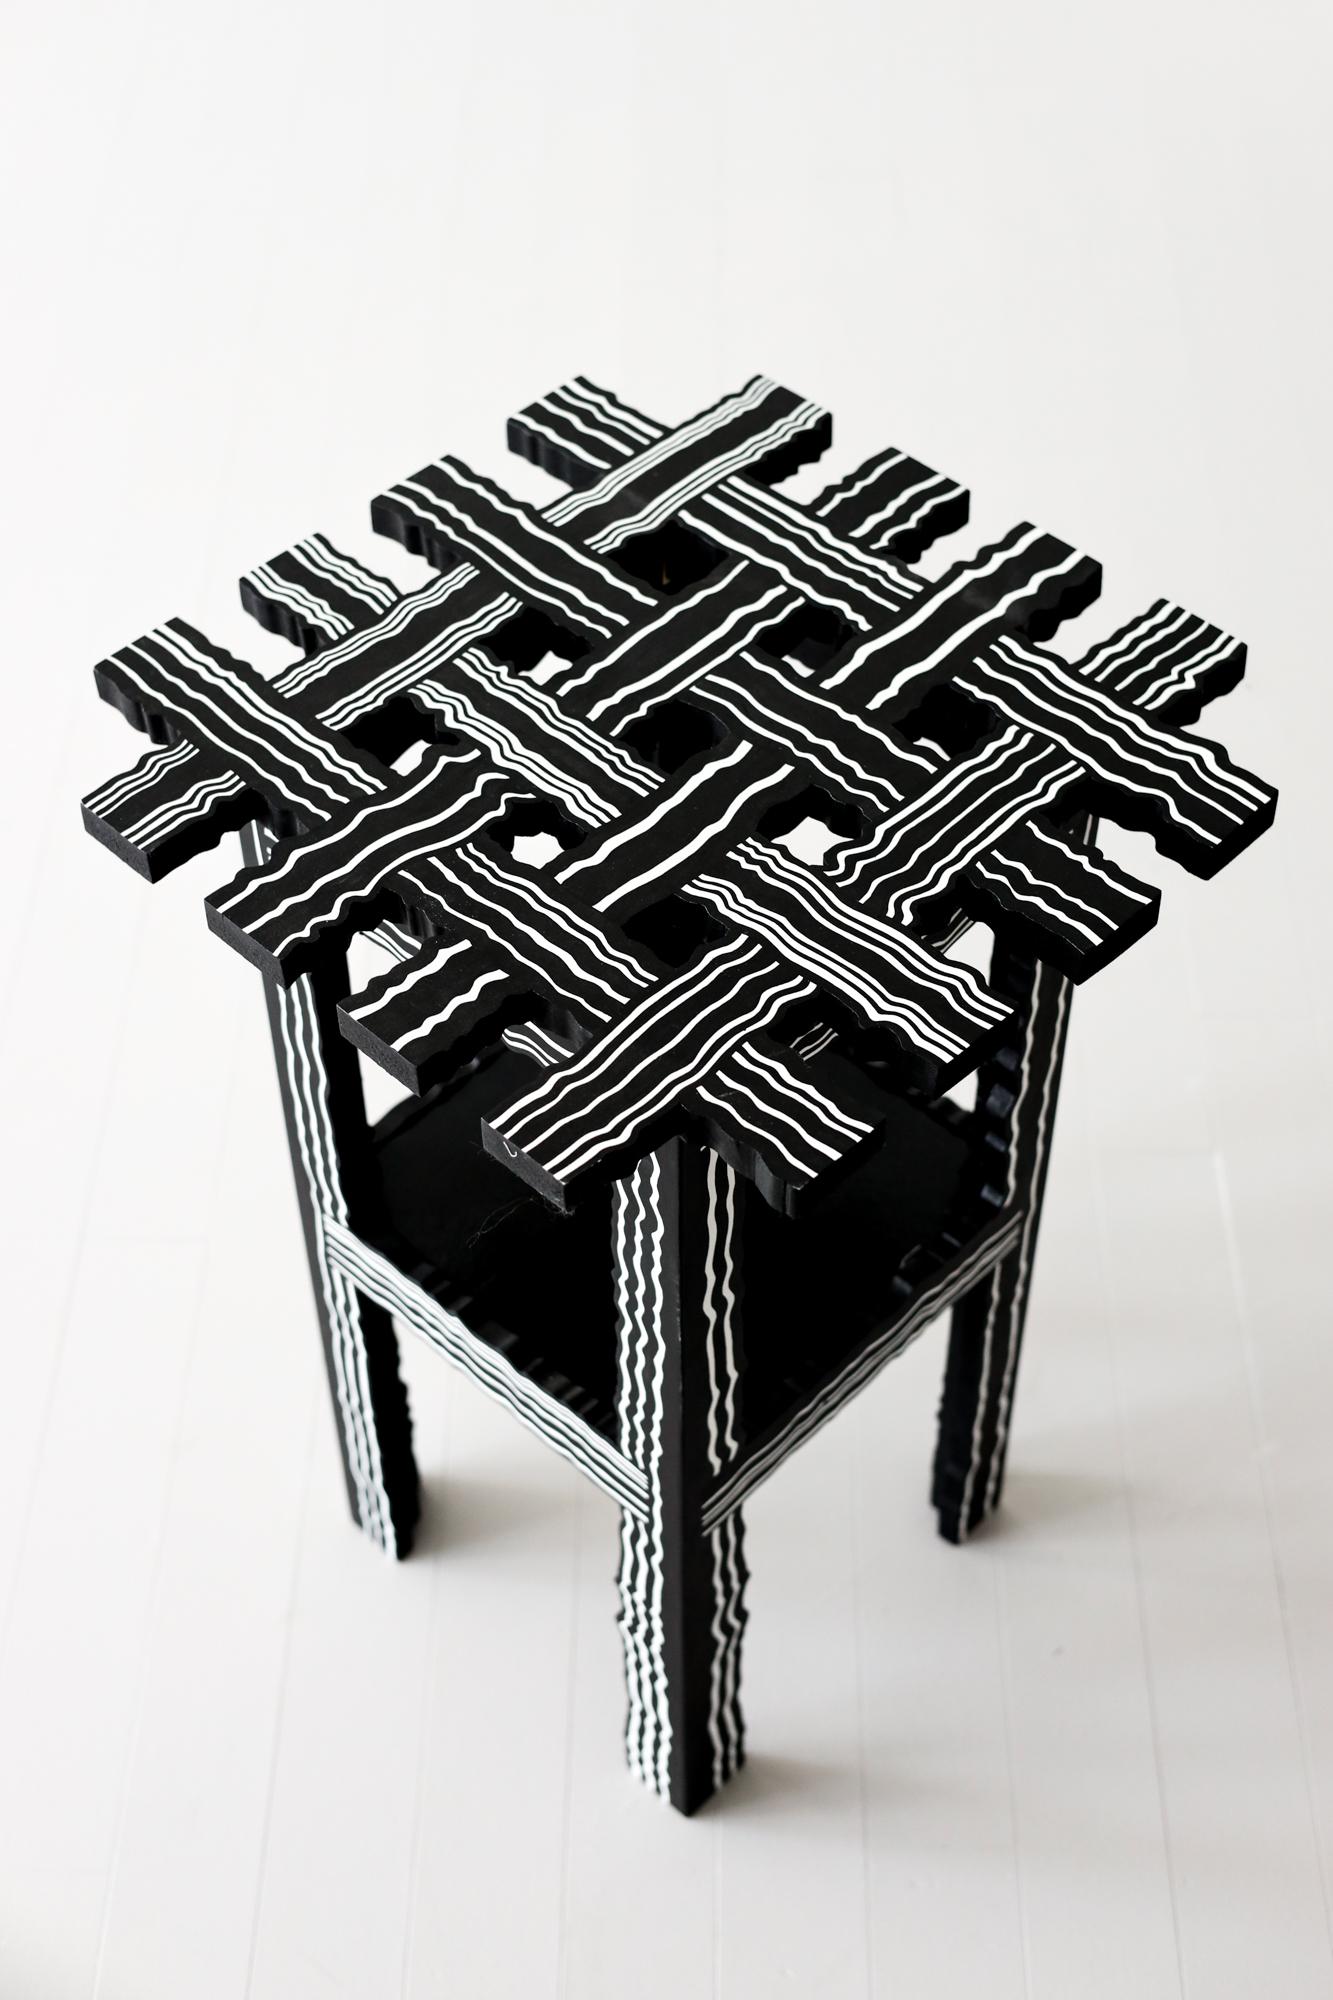 Grid Table - Contemporary Sculpture by Jason Andrew Turner